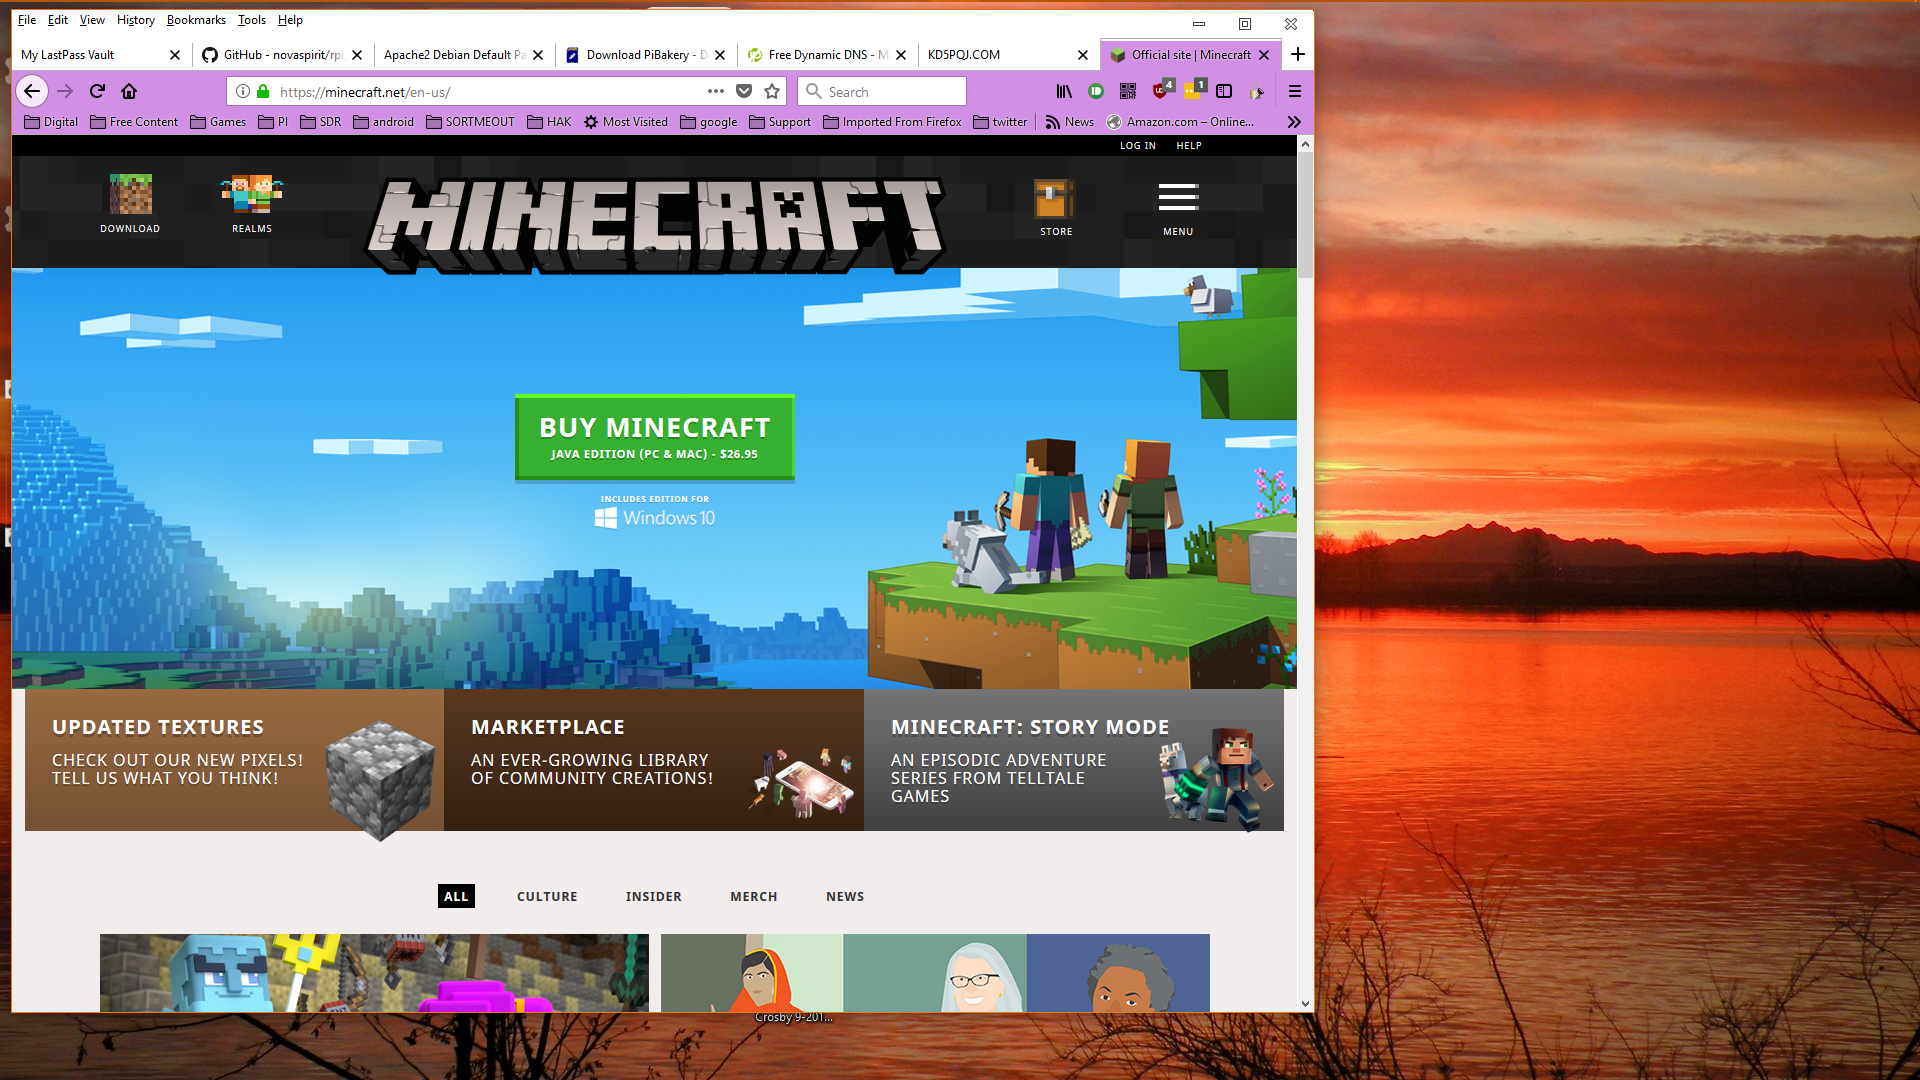 Image of minecraft.net home page that shows java client for sale at $27